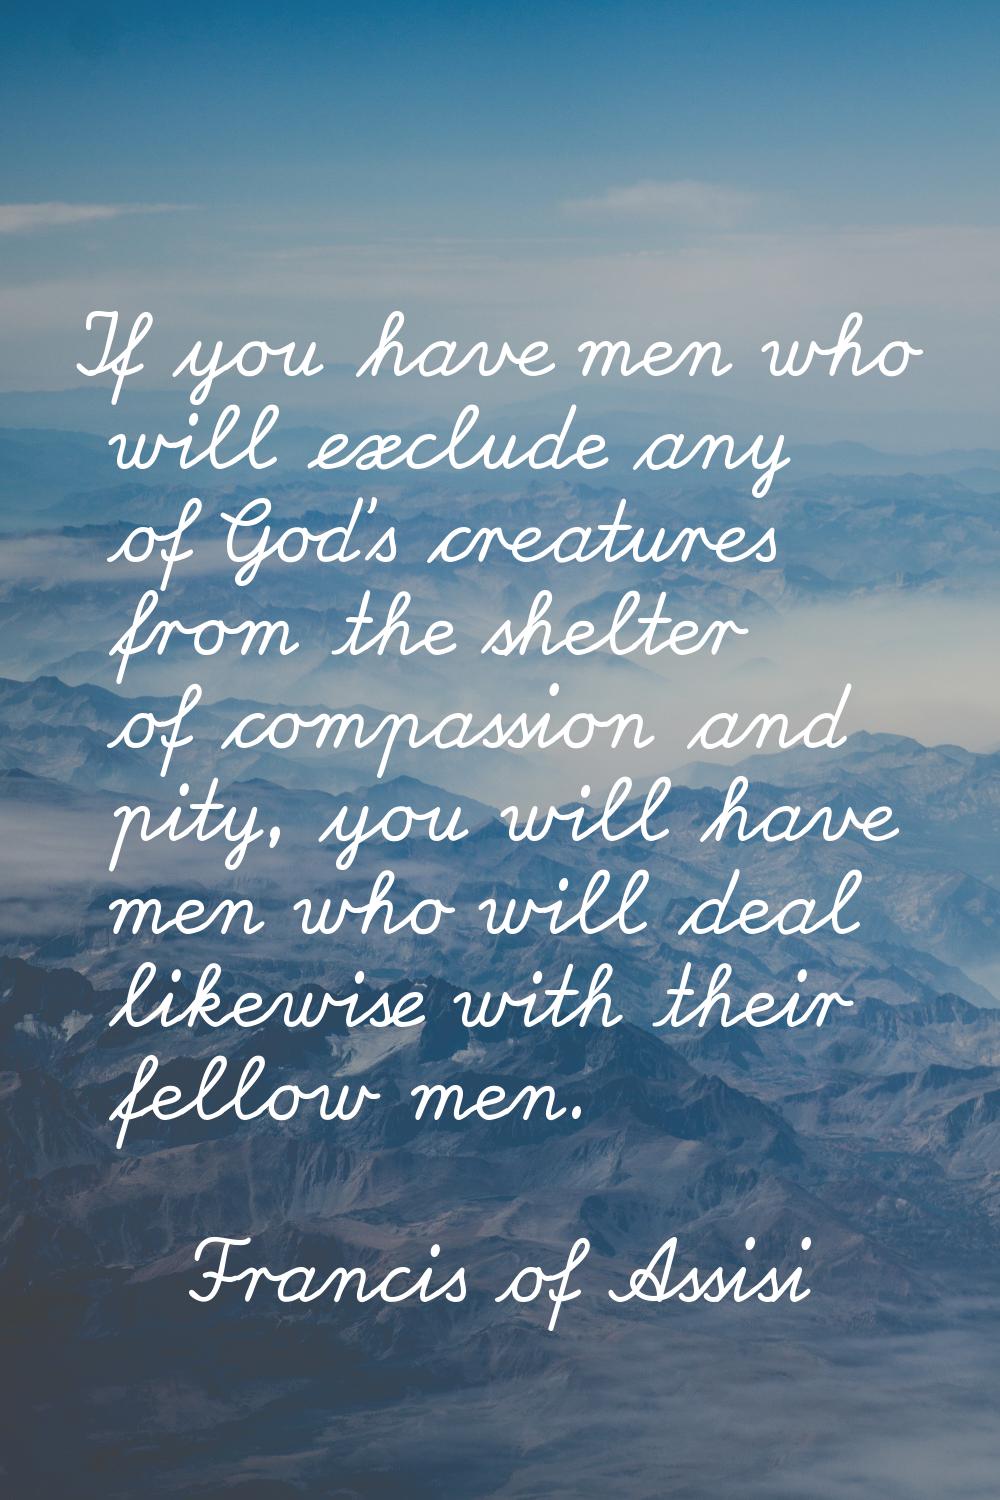 If you have men who will exclude any of God's creatures from the shelter of compassion and pity, yo